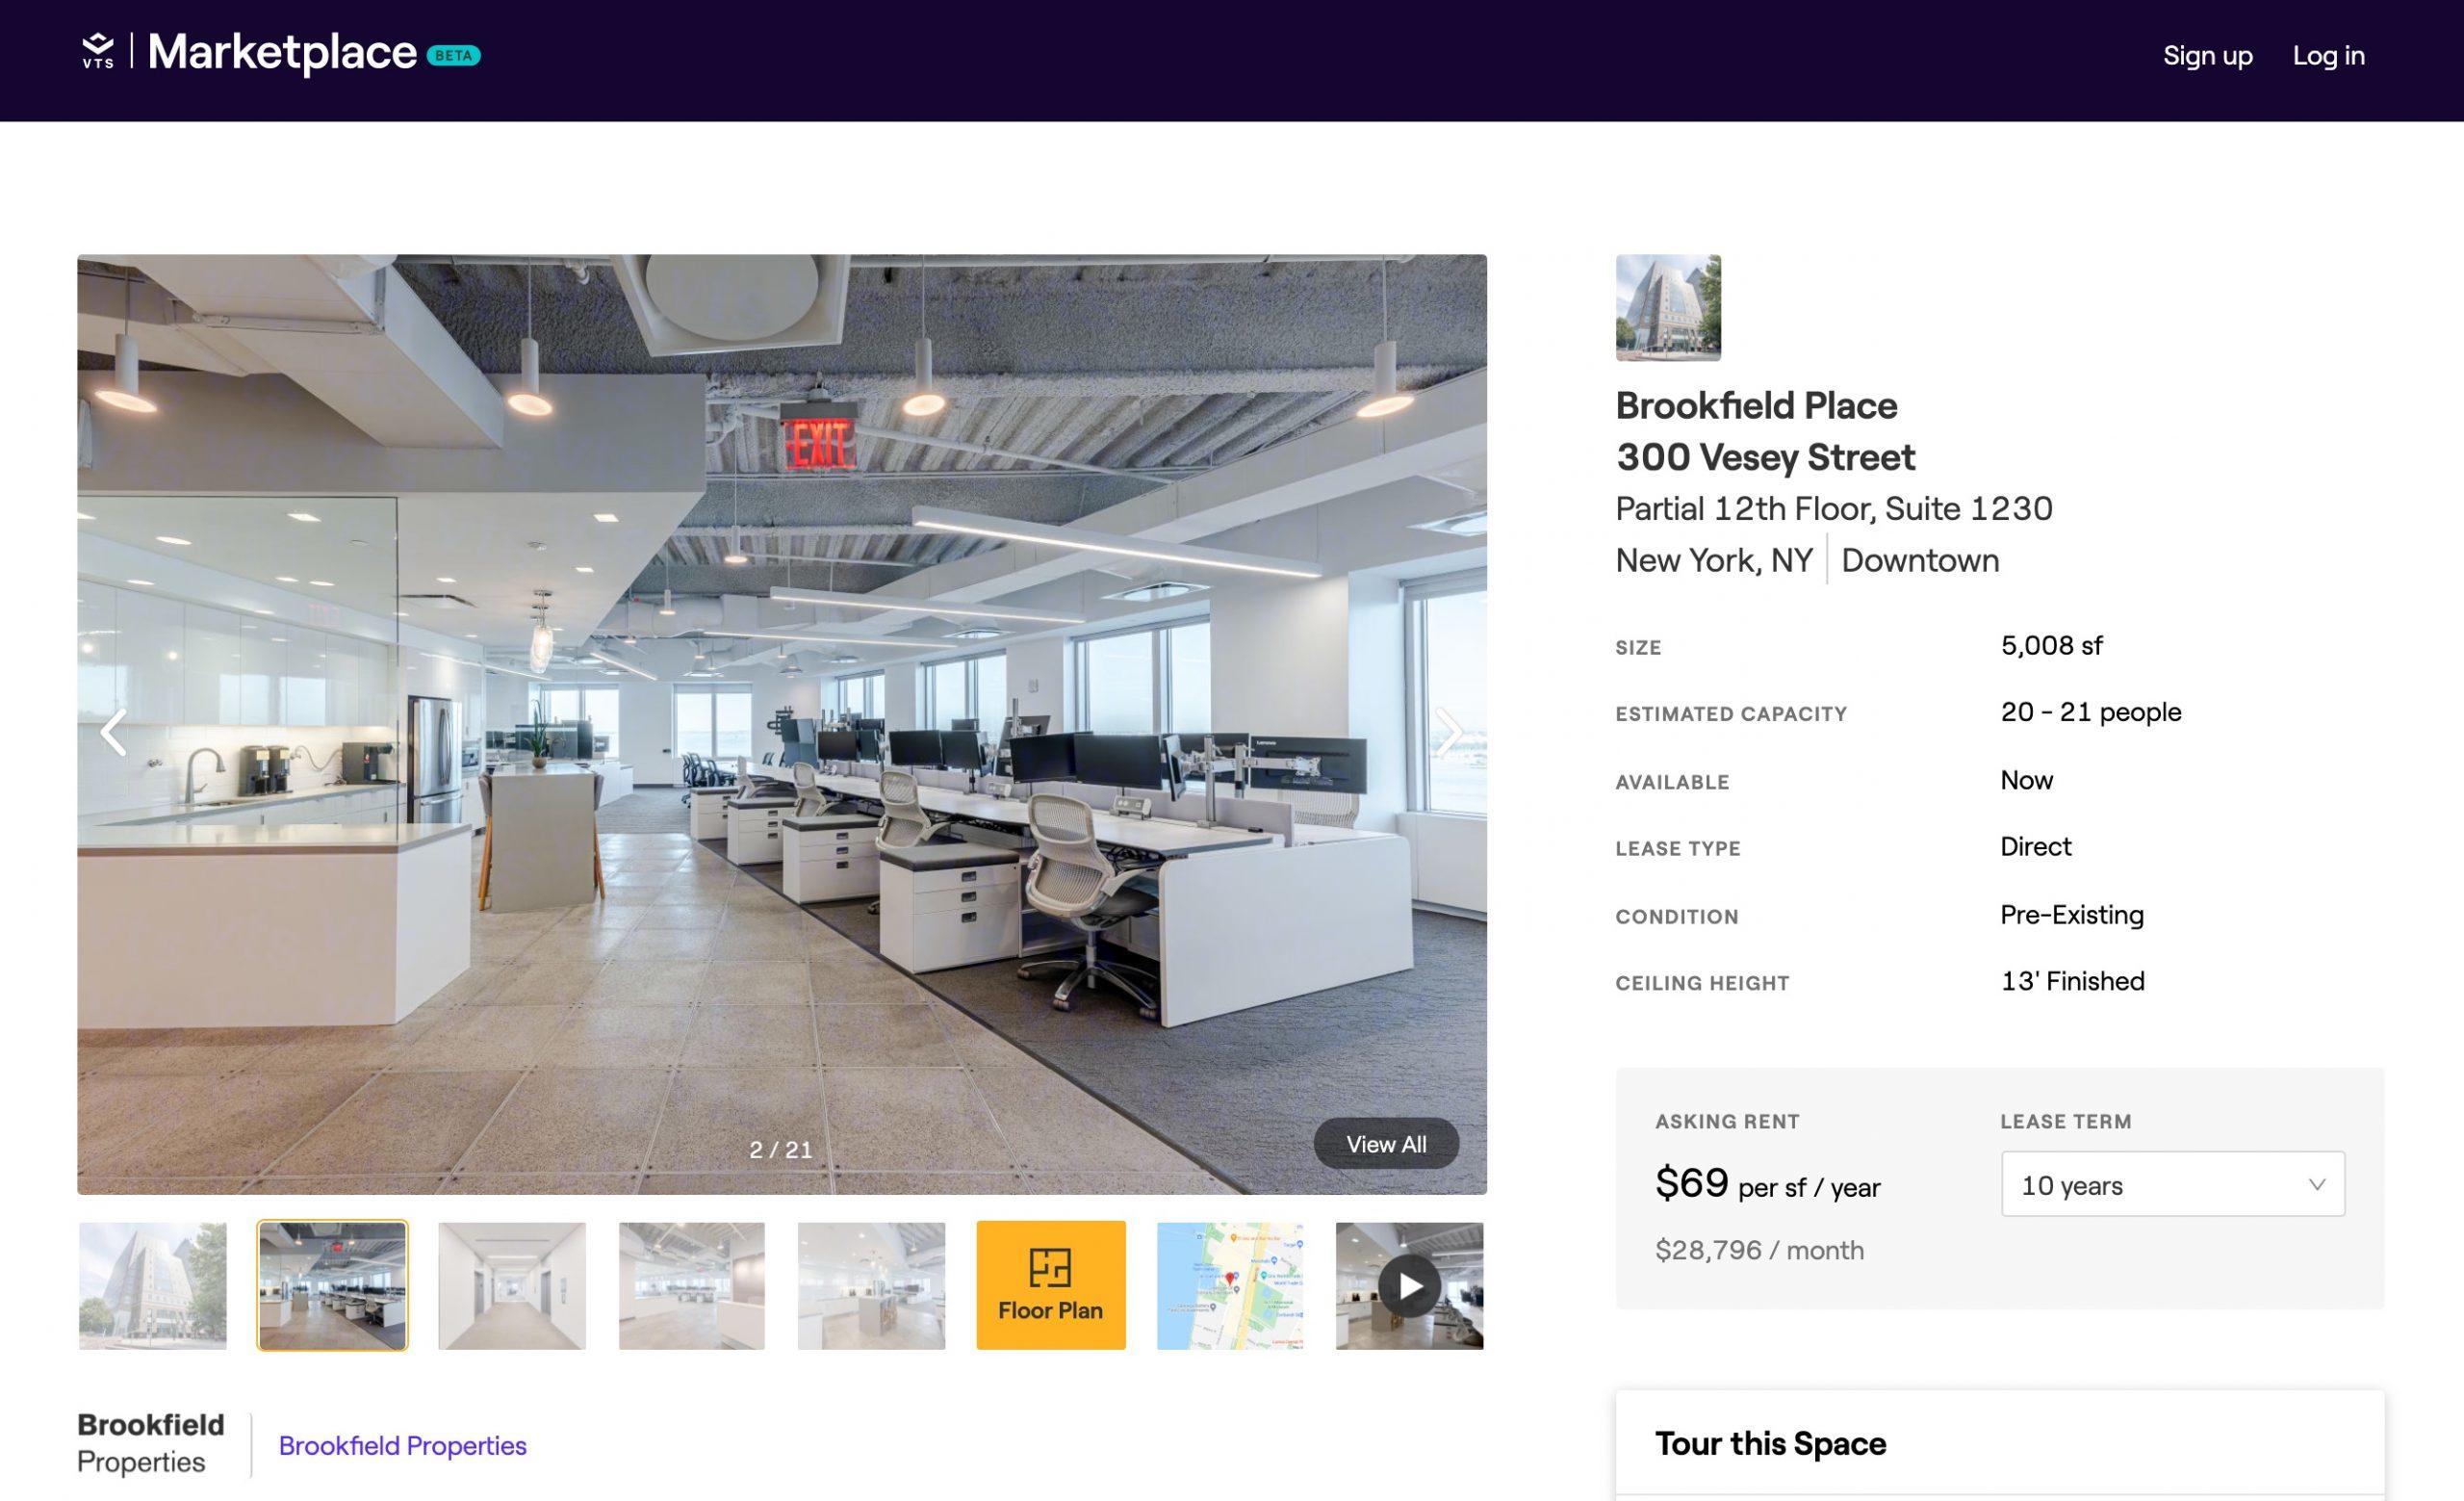 The listing page for an available space at Brookfield Properties’ 300 Vesey Street on the VTS Marketplace